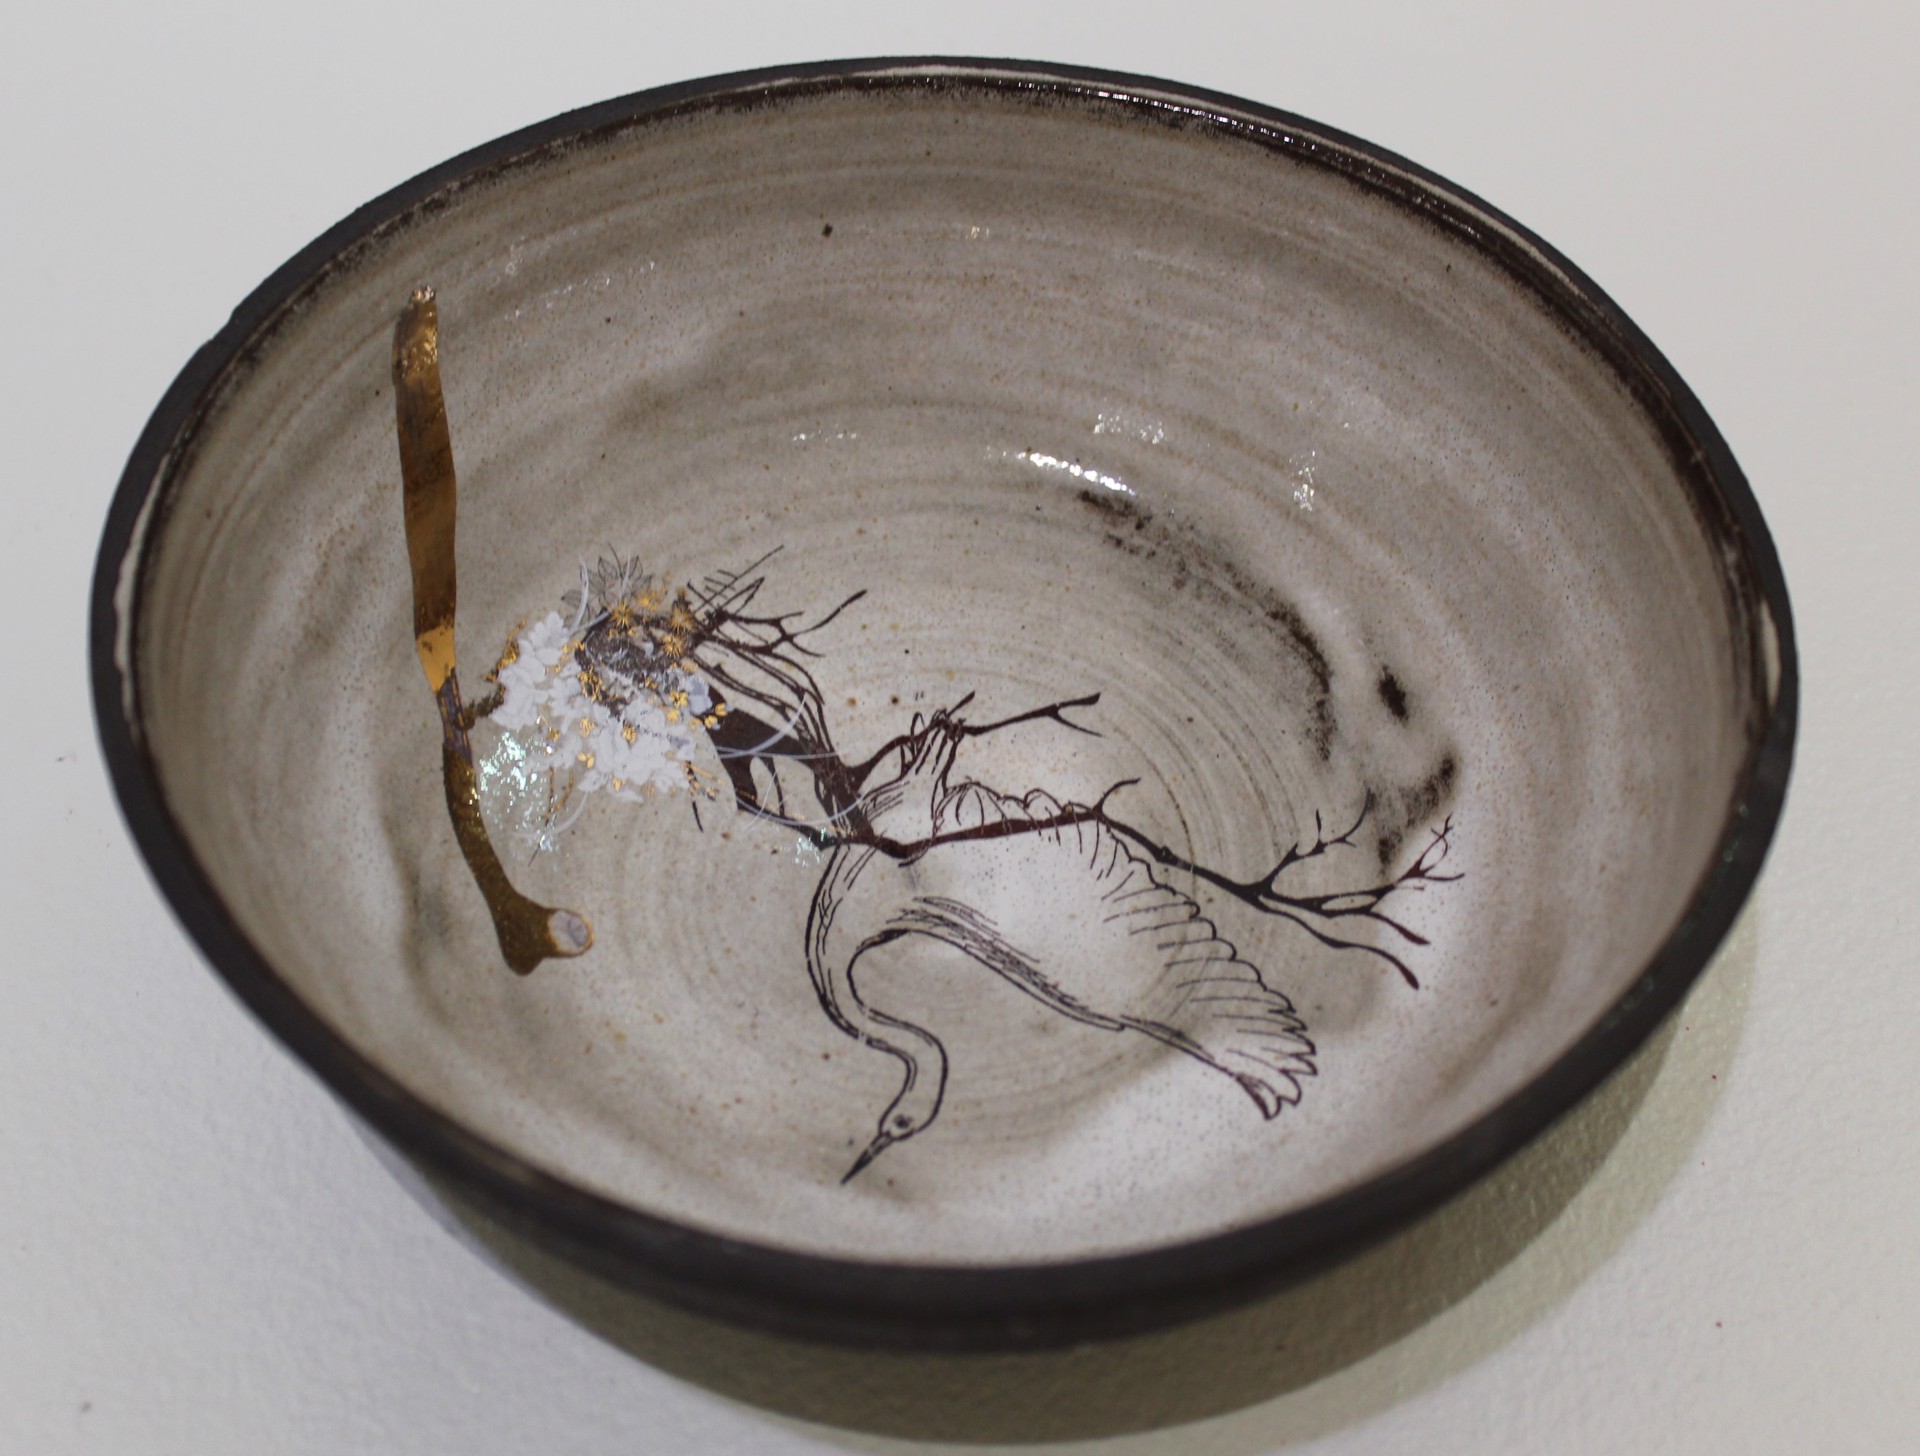 Perfectly Imperfect Bowl by Therese Knowles